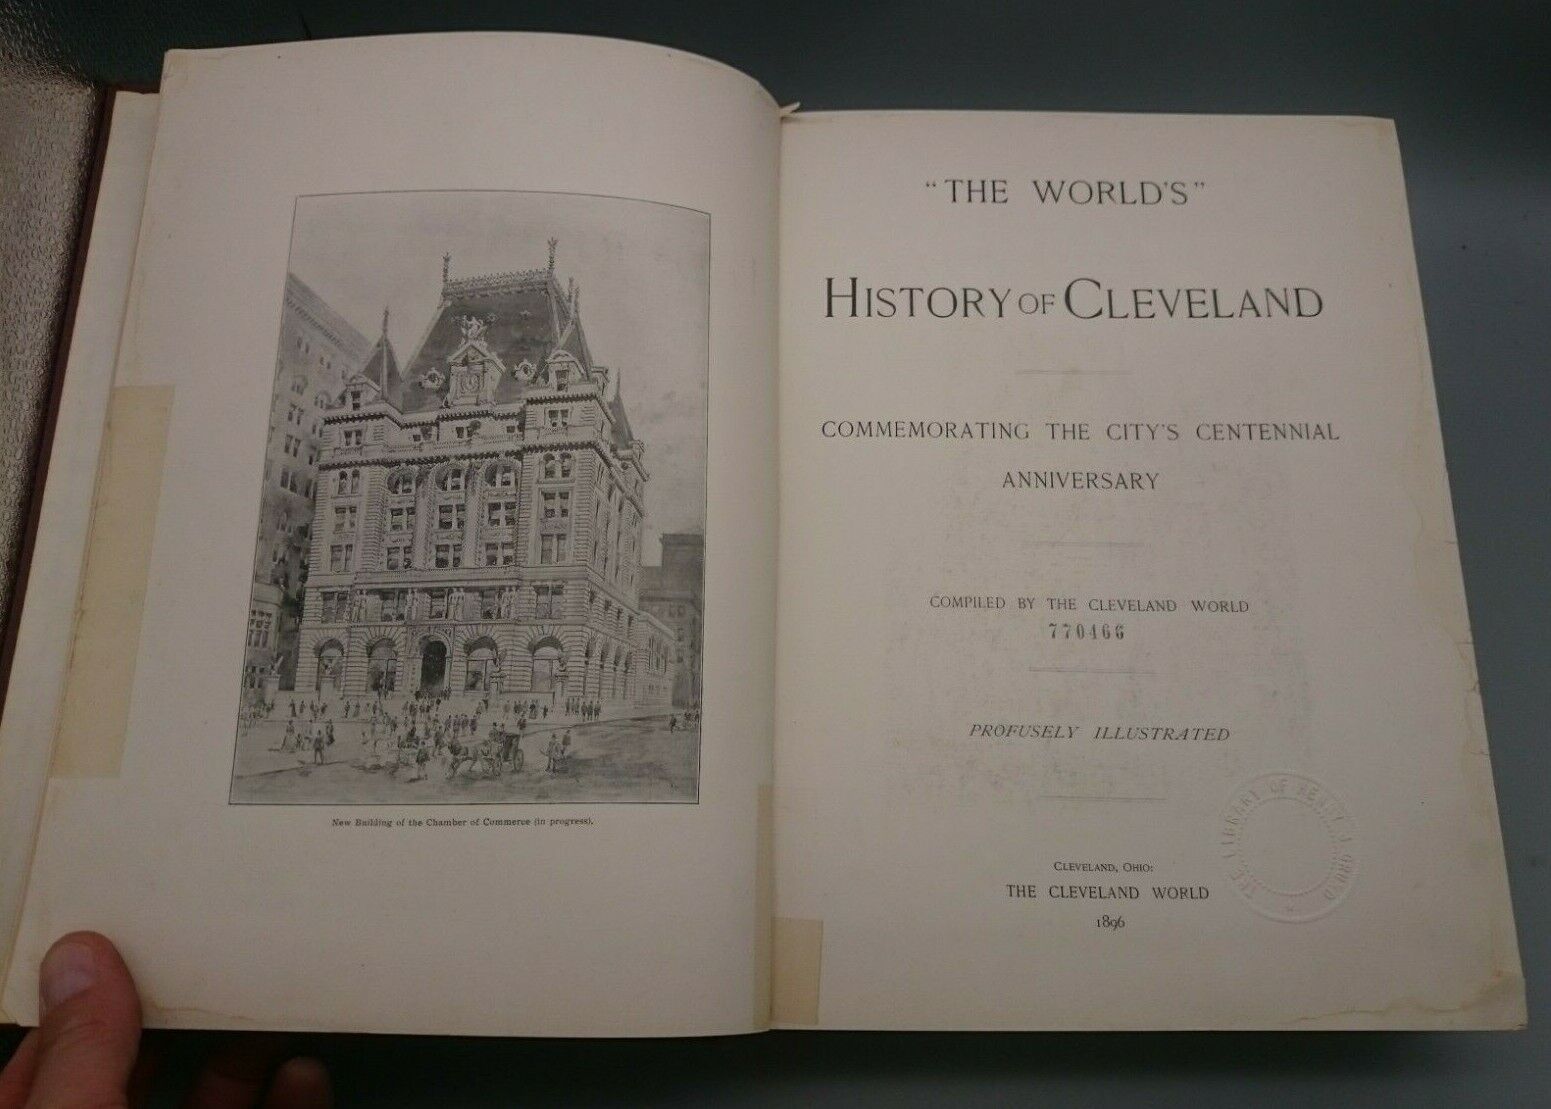 1896 The World's History of Cleveland Ohio, profusely illustrated, Jerome Smiley